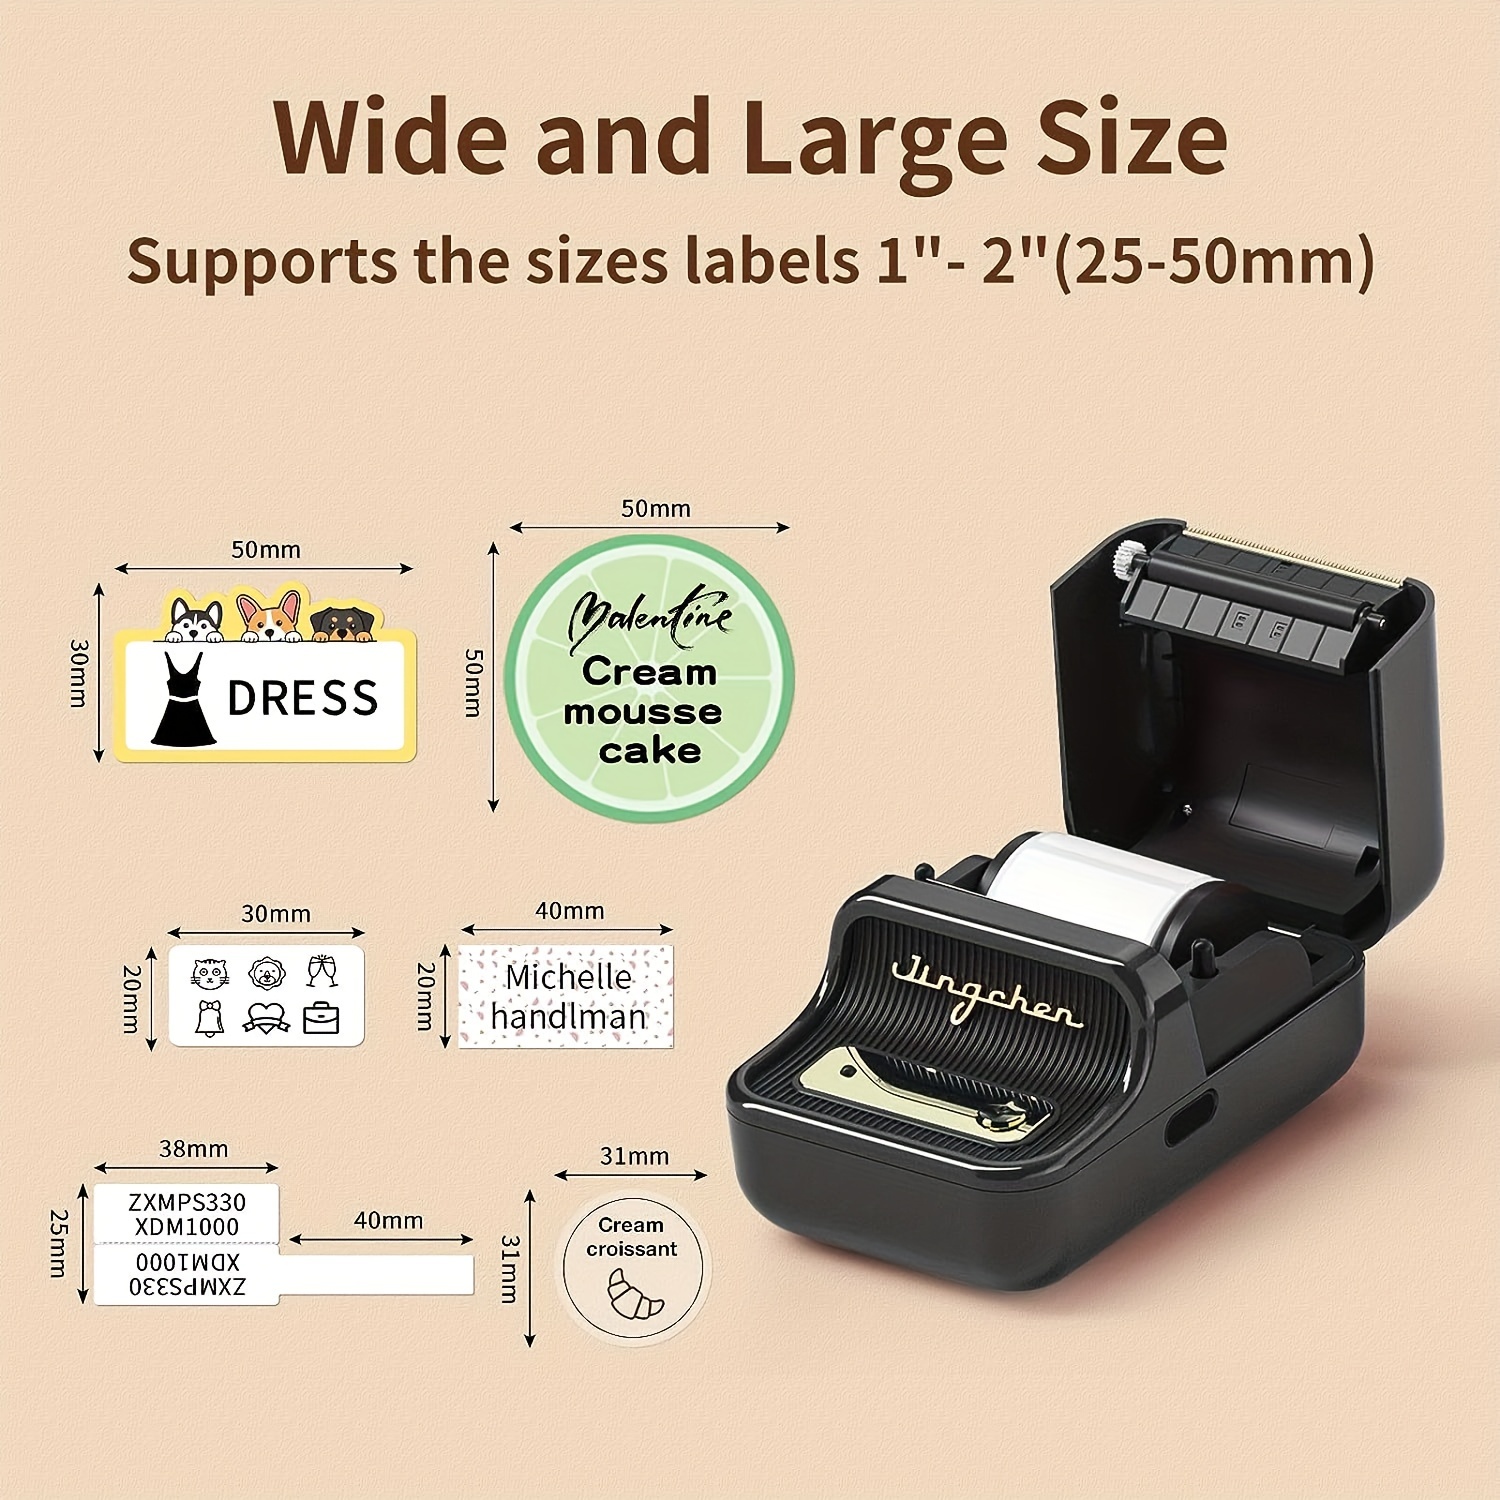 B21 Label Maker Machine with Tape - Efficient Labeling Solution